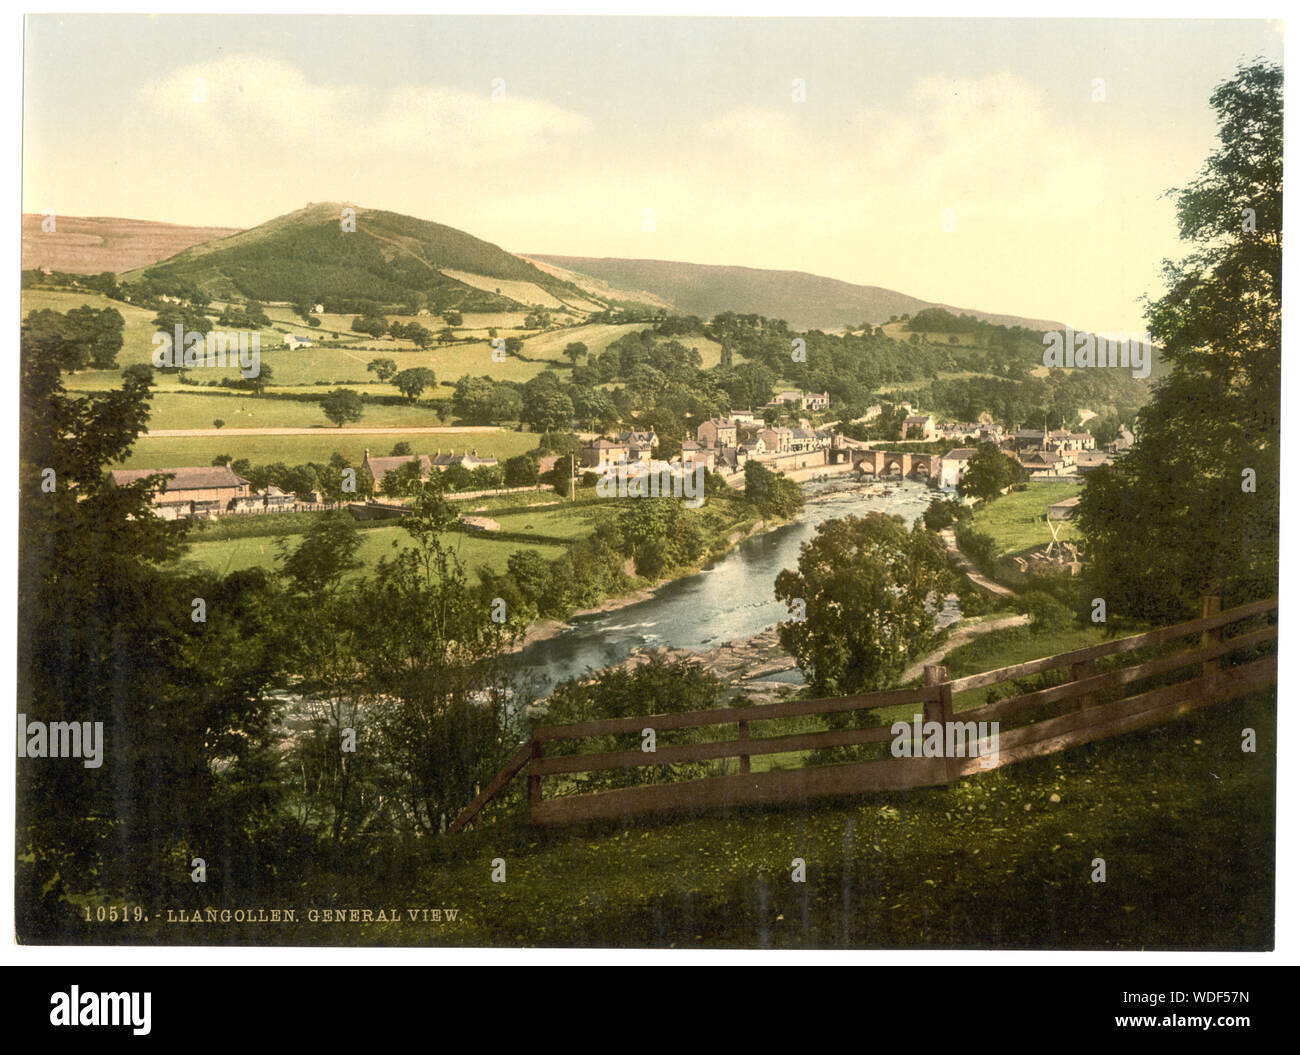 General view, Llangollen, Wales Title from the Detroit Publishing Co., catalogue J-foreign section. Detroit, Mich. : Detroit Photographic Company, 1905. Print no. 10519. Forms part of: Views of landscape and architecture in Wales in the Photochrom print collection. Stock Photo